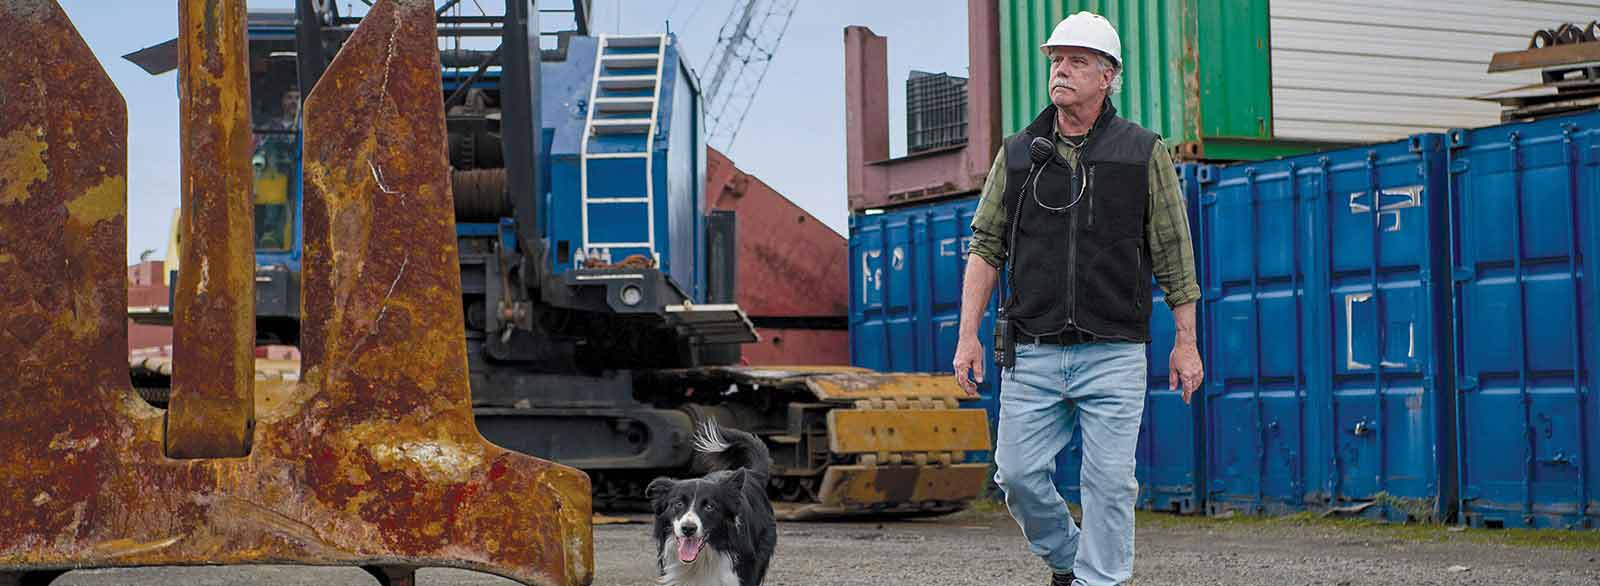 Man and dog leave construction site